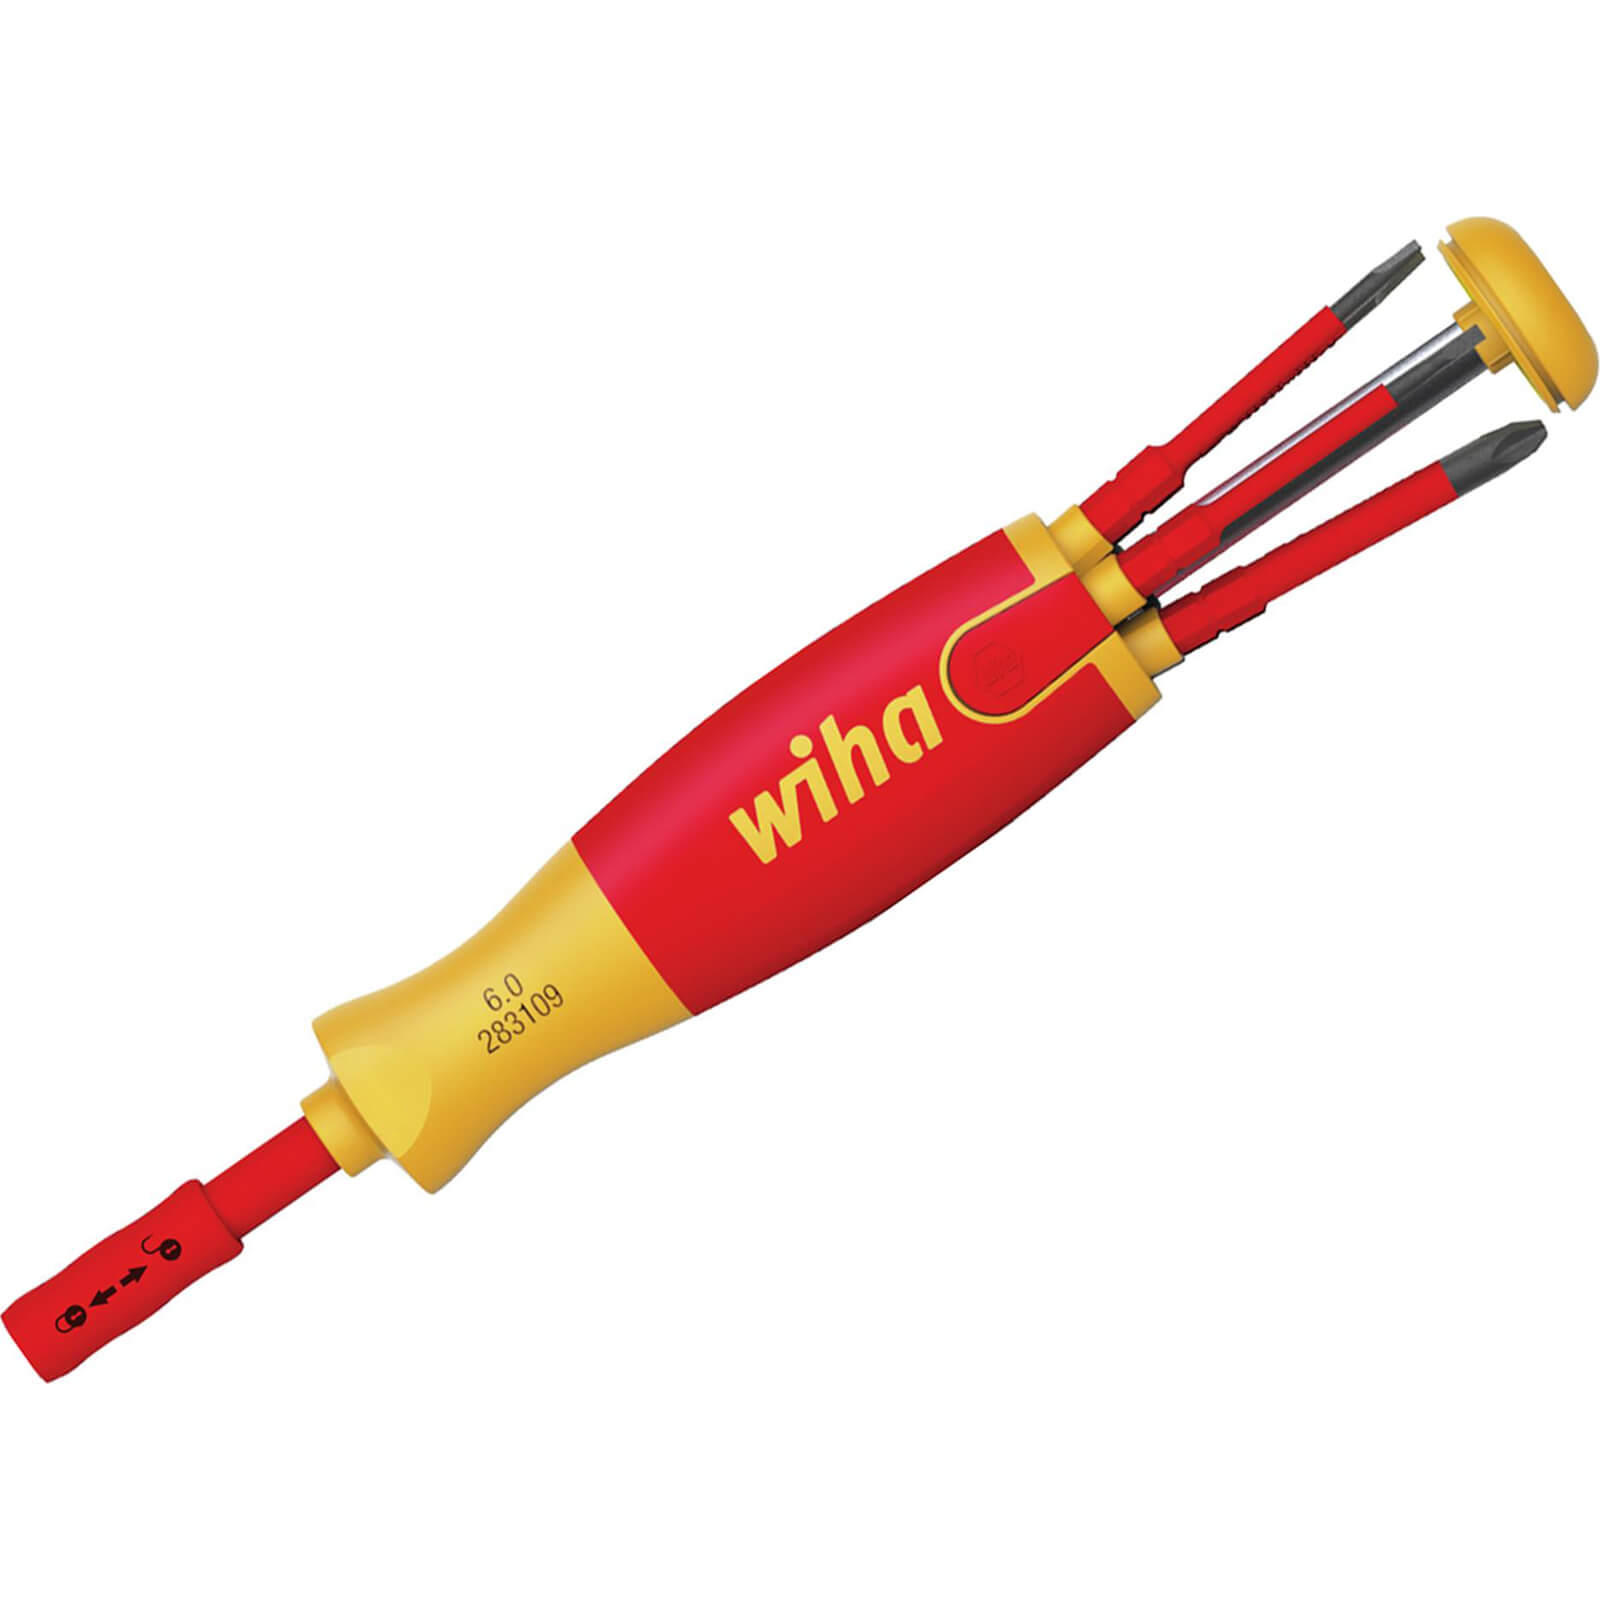 Wiha Electric Liftup Screwdriver and 6 Piece Slotted / Phillips Bit Set